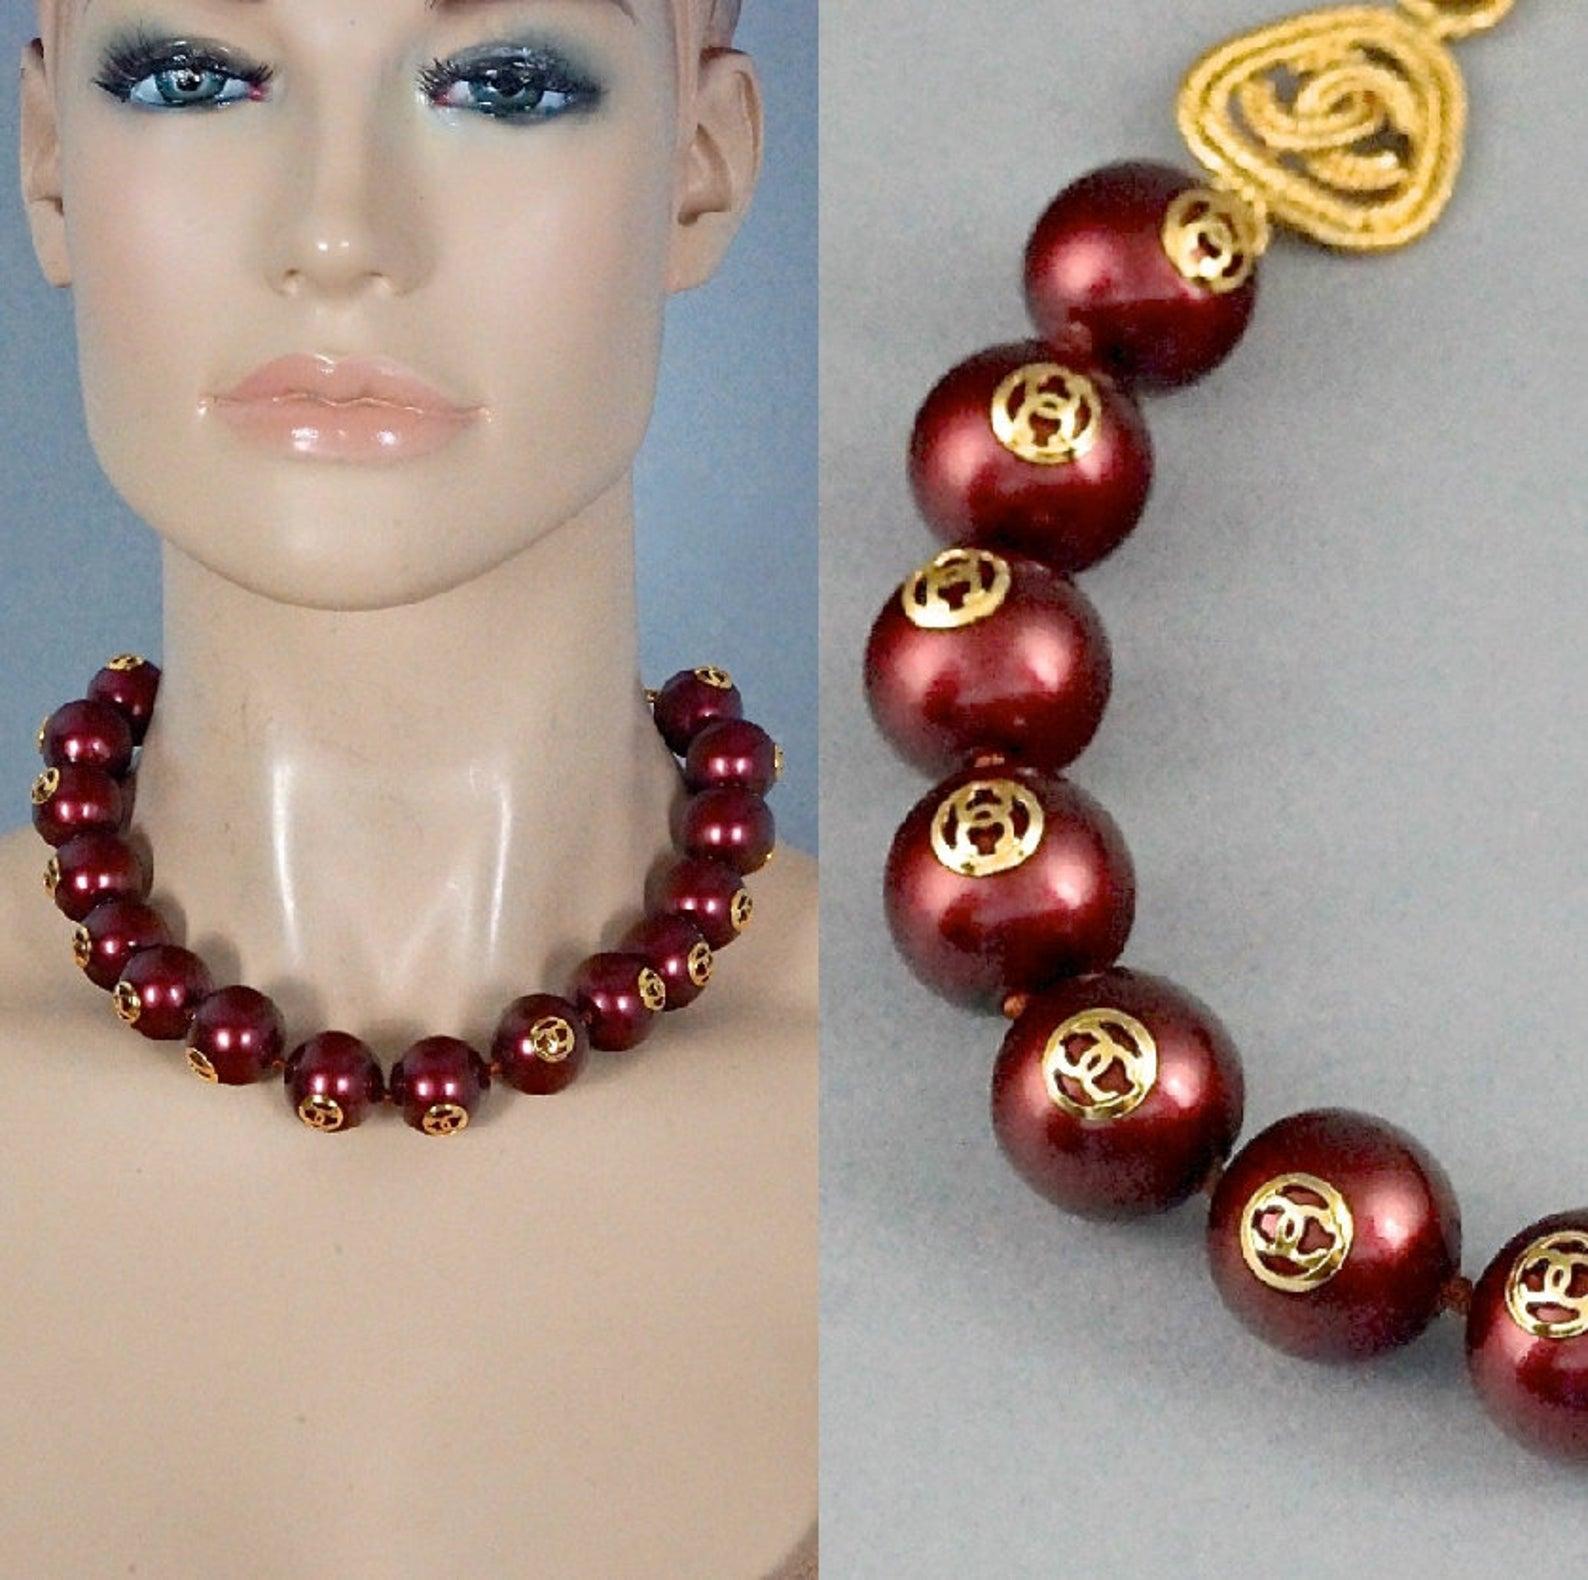 Features:
- 100% Authentic CHANEL.
- Single strand bordeaux glass pearl necklace.
- Each pearl has CC metal logo.
- Adjustable hook closure.
- Signed CHANEL 2 CC 8 Made in France on the oval plate.
- Gold tone hardware.
- Excellent vintage